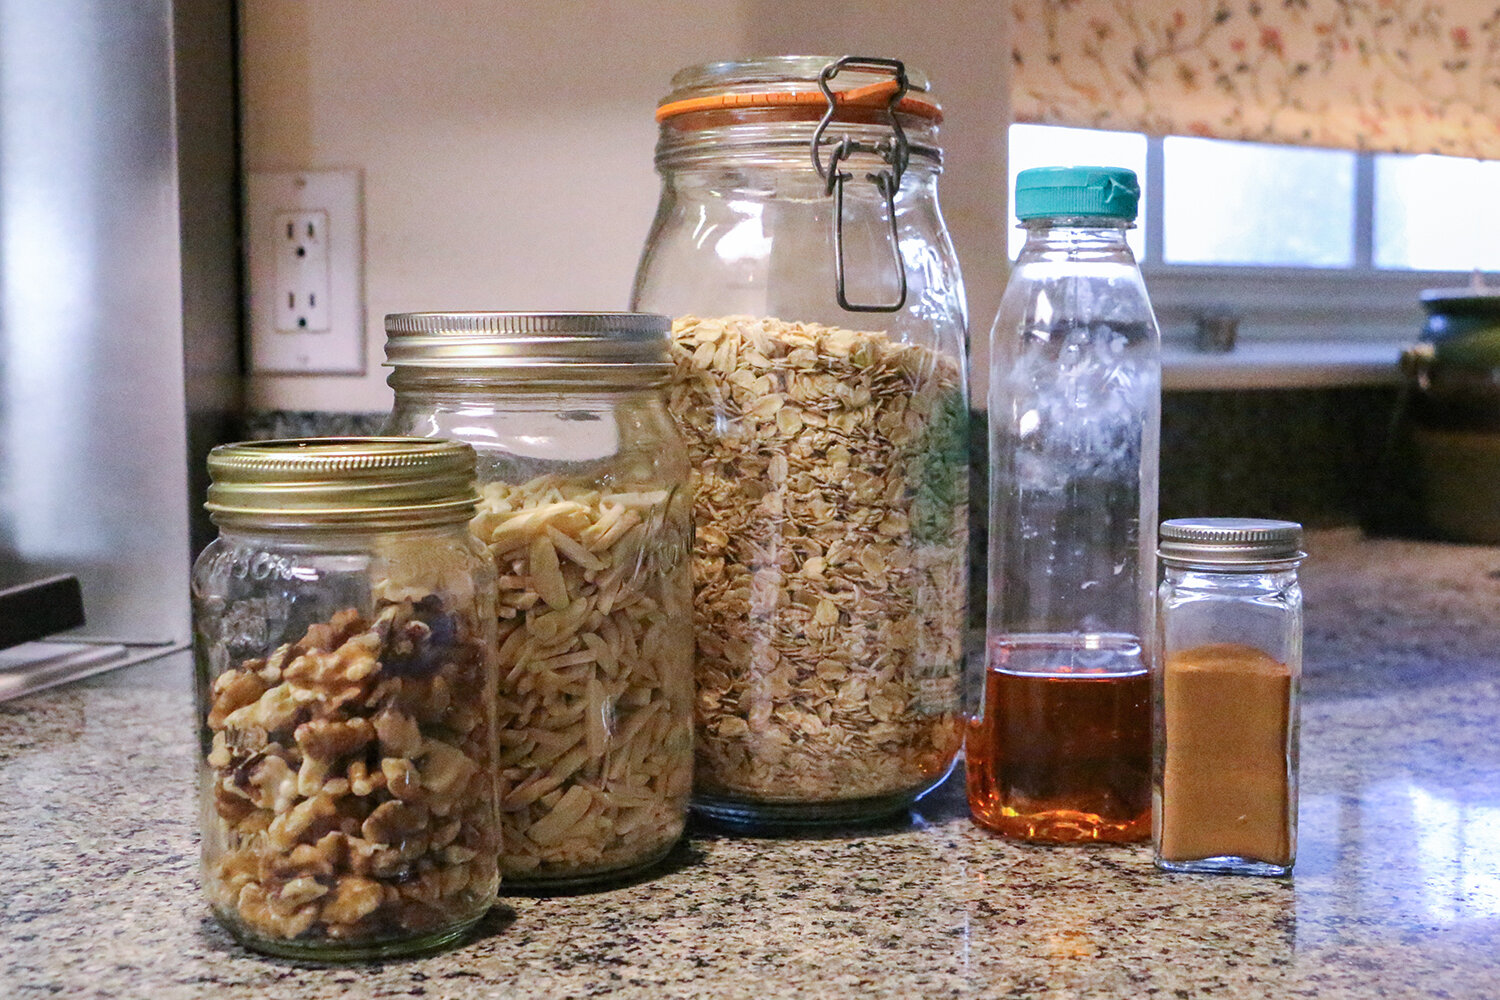 Ingredients for homemade granola